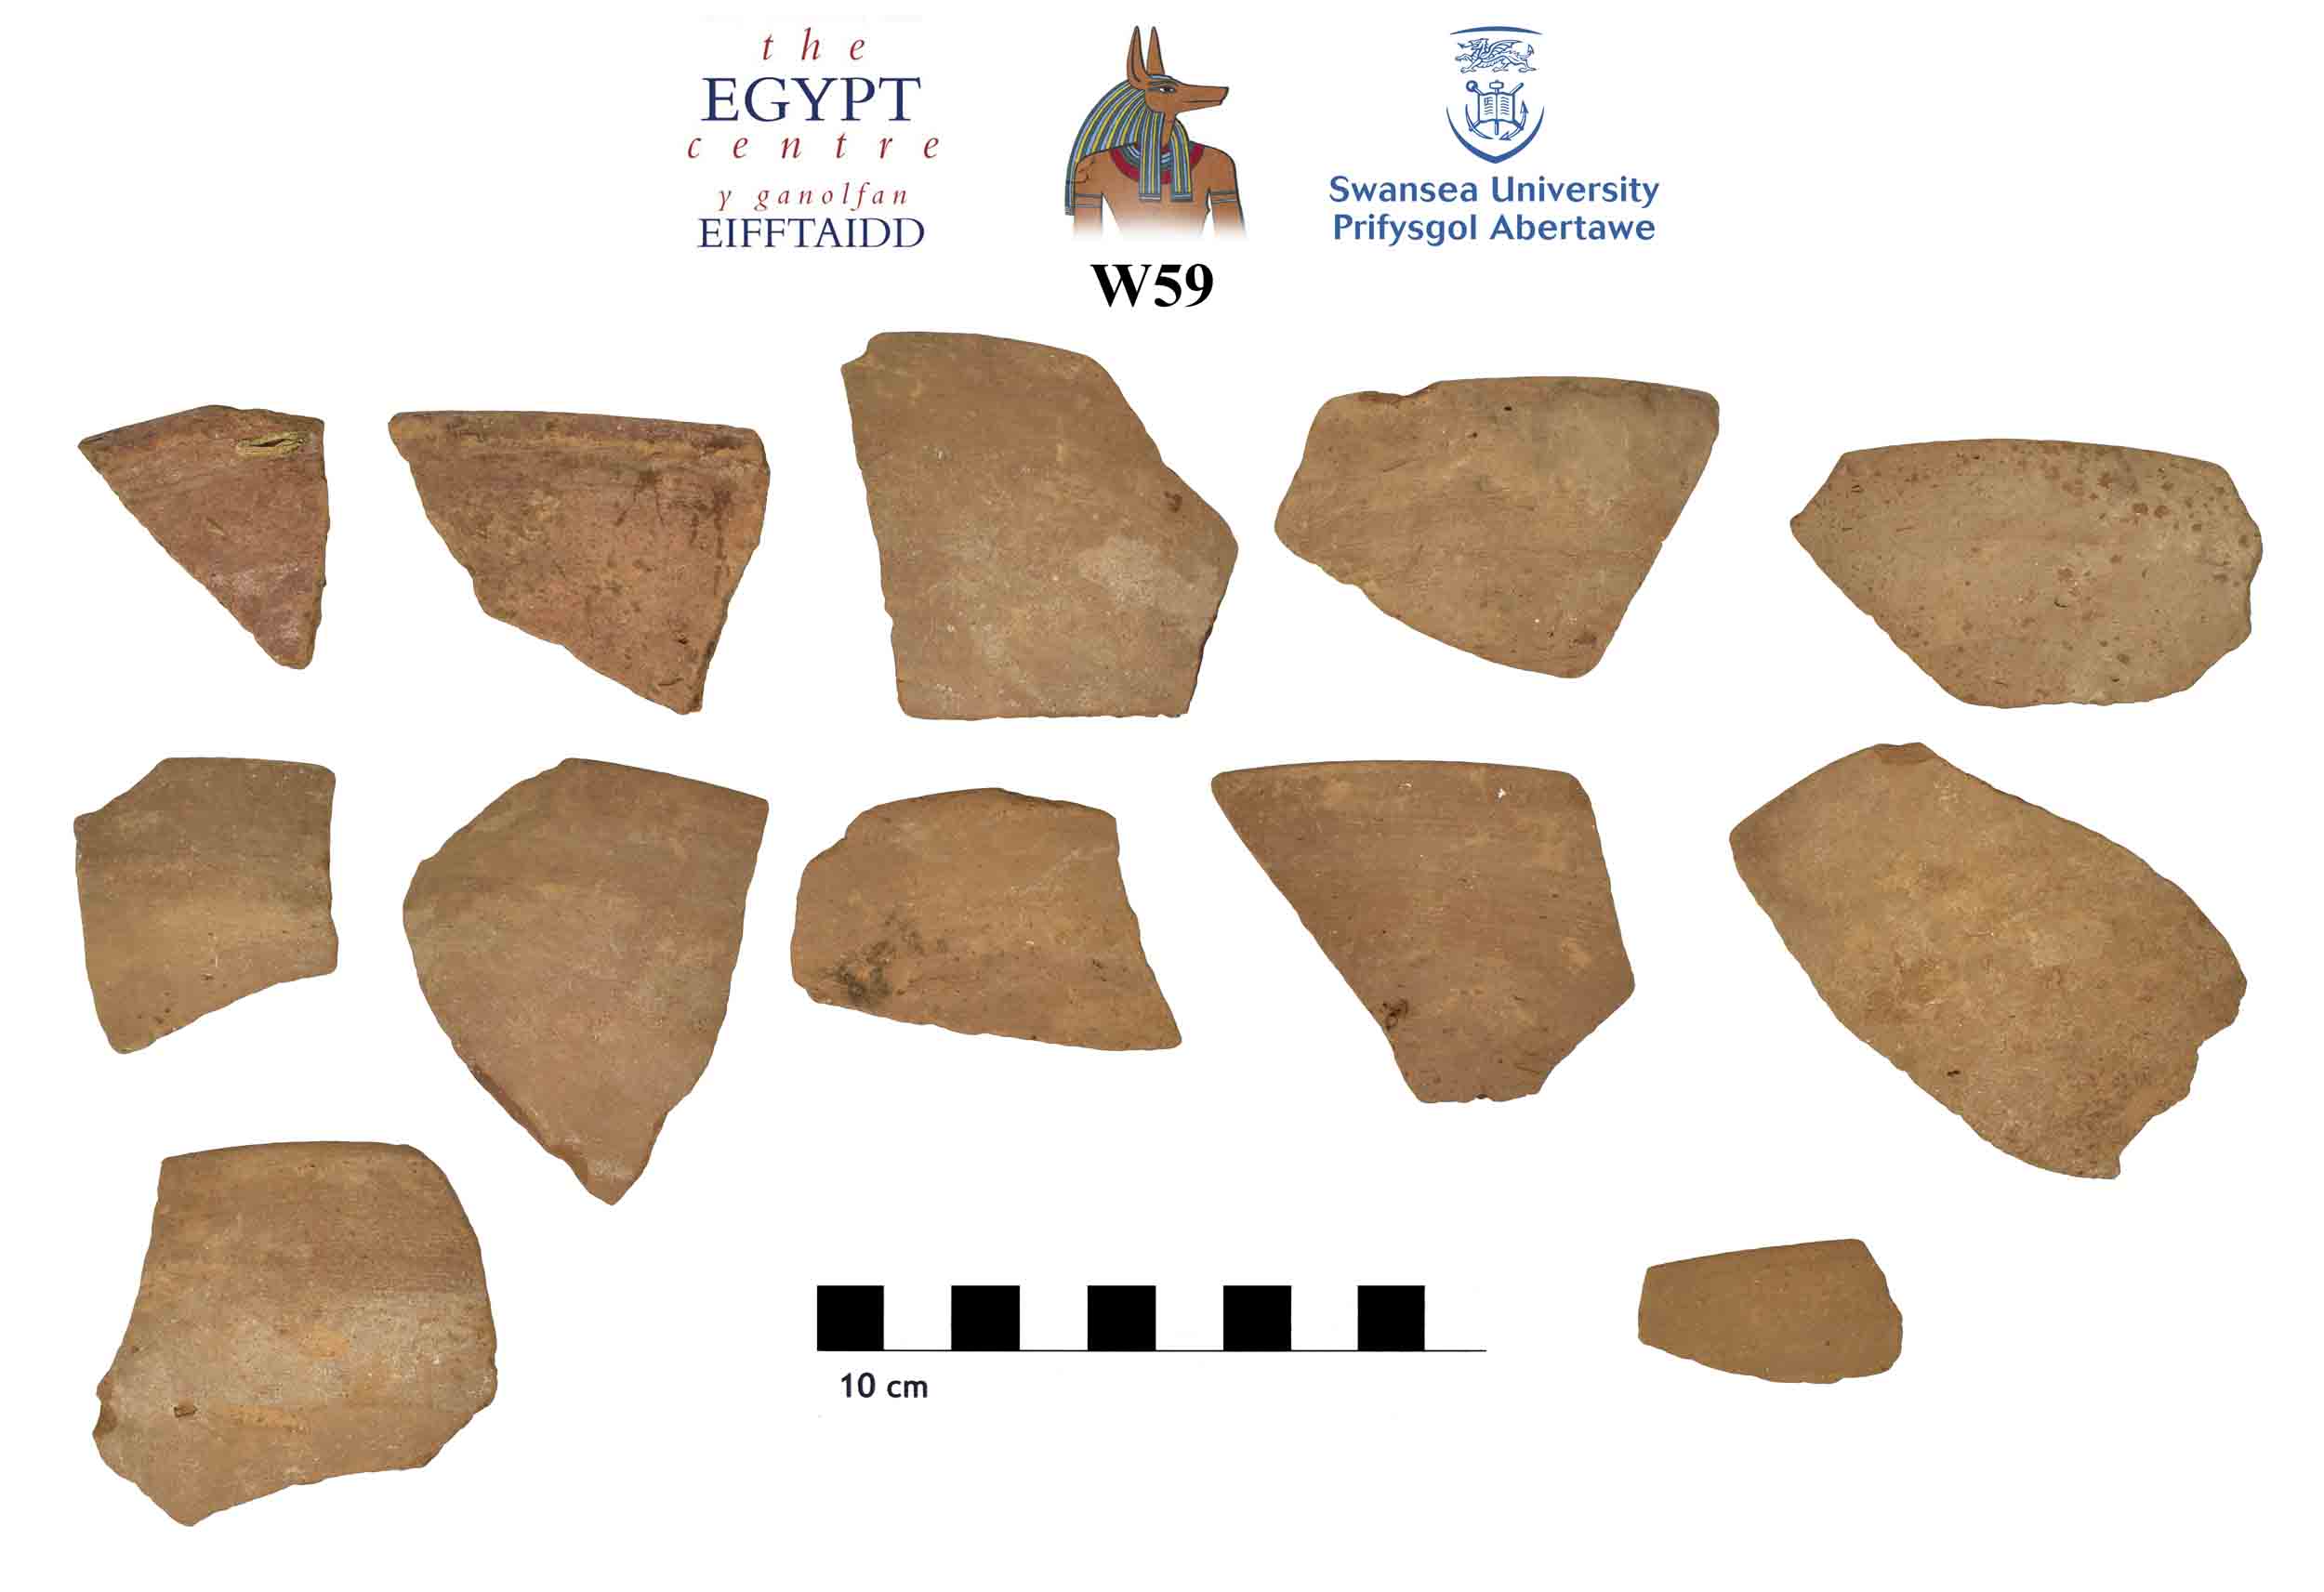 Image for: Sherds of pottery